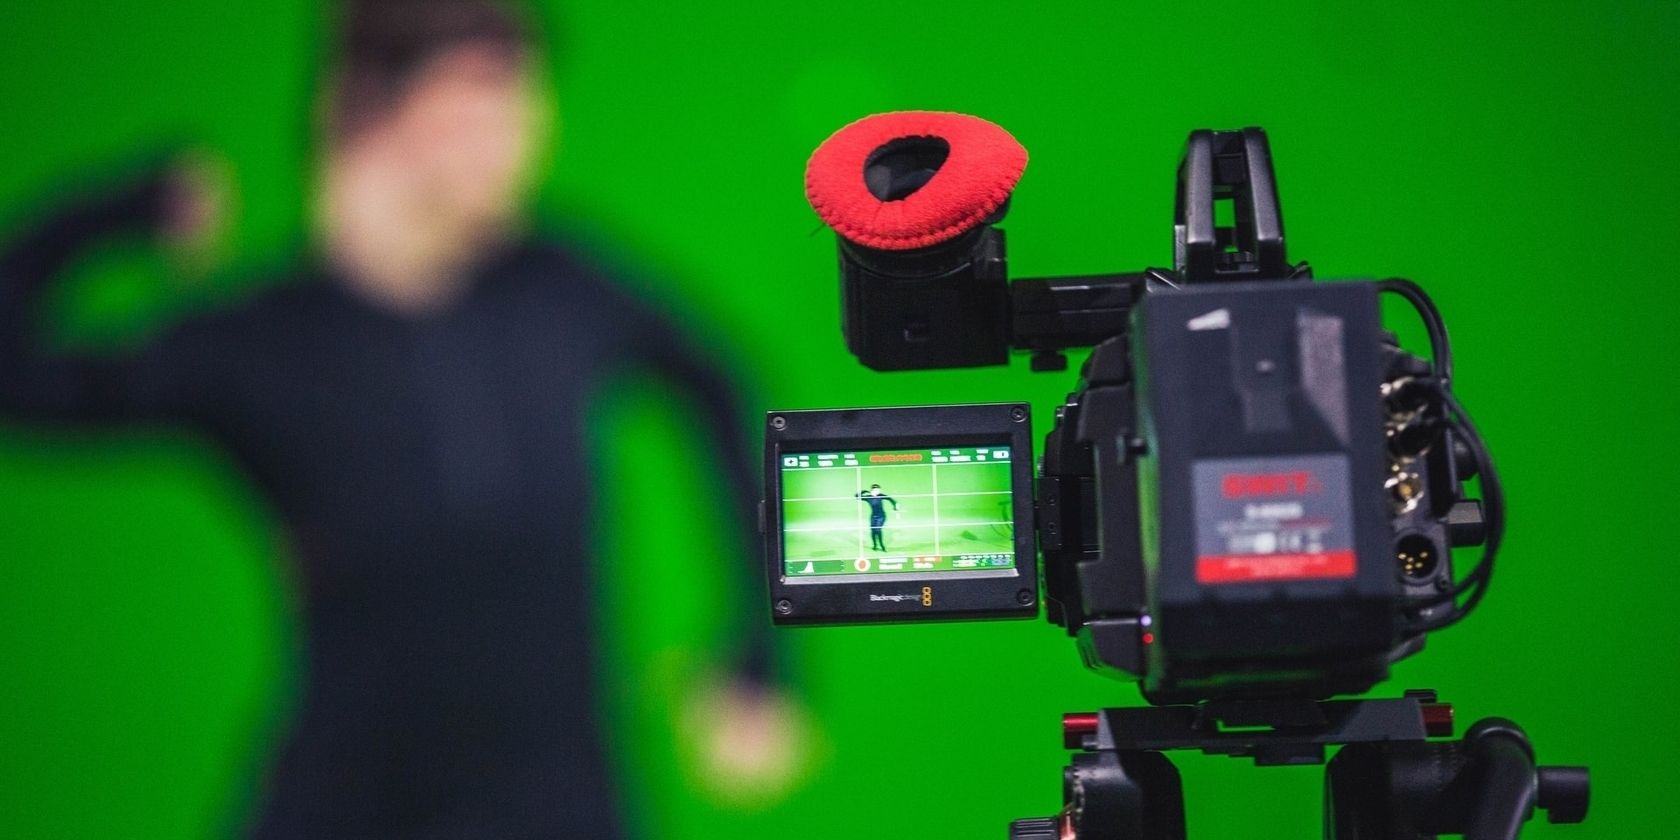 Camera filming someone in fornt of green screen